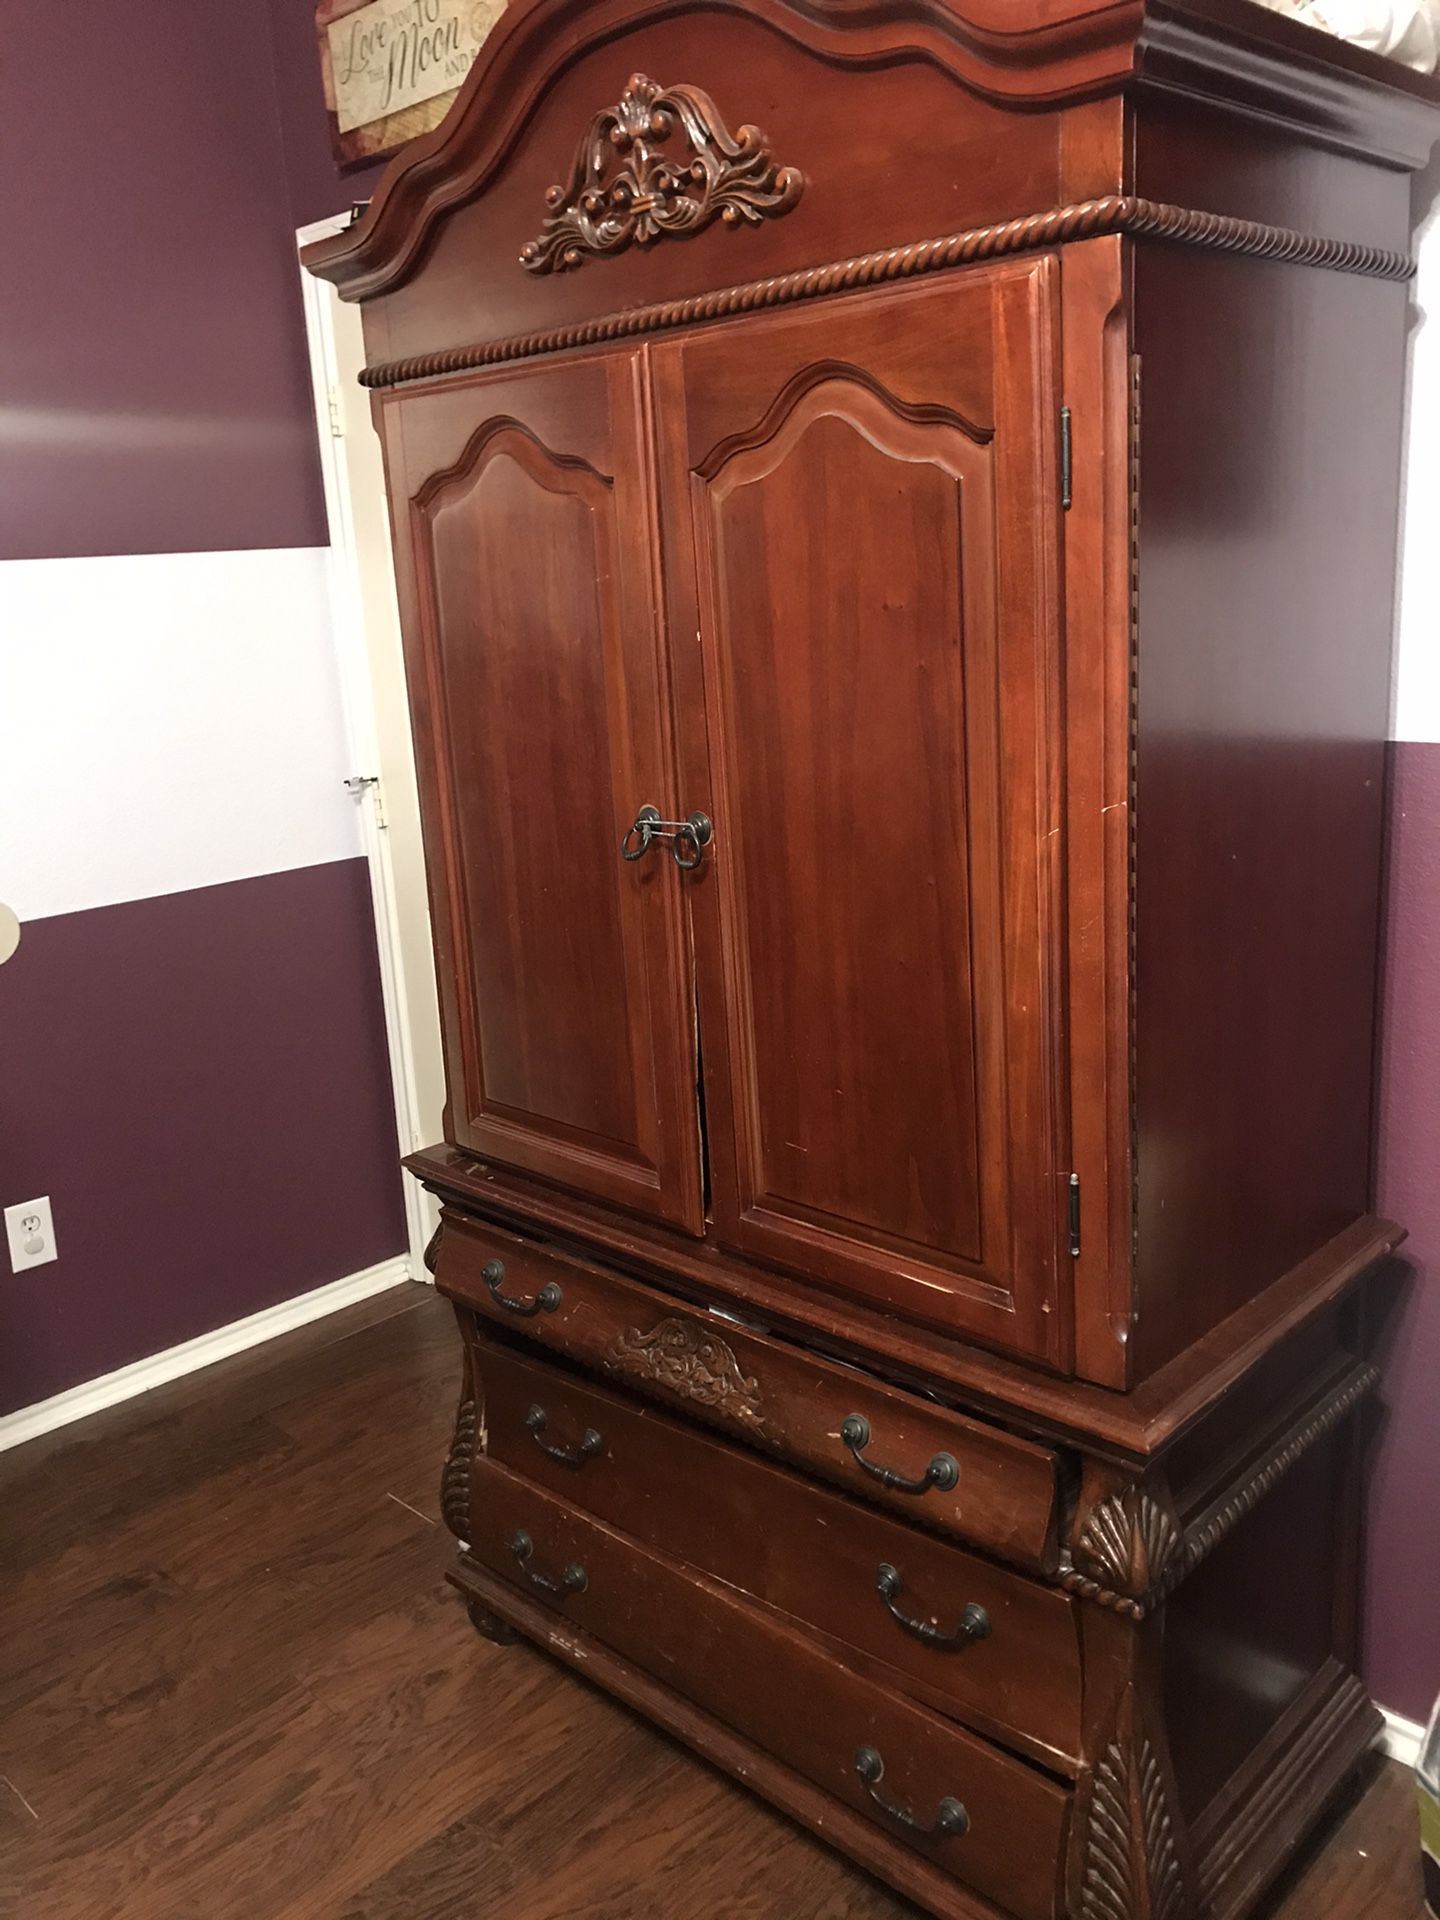 FREE Armoire TV stand